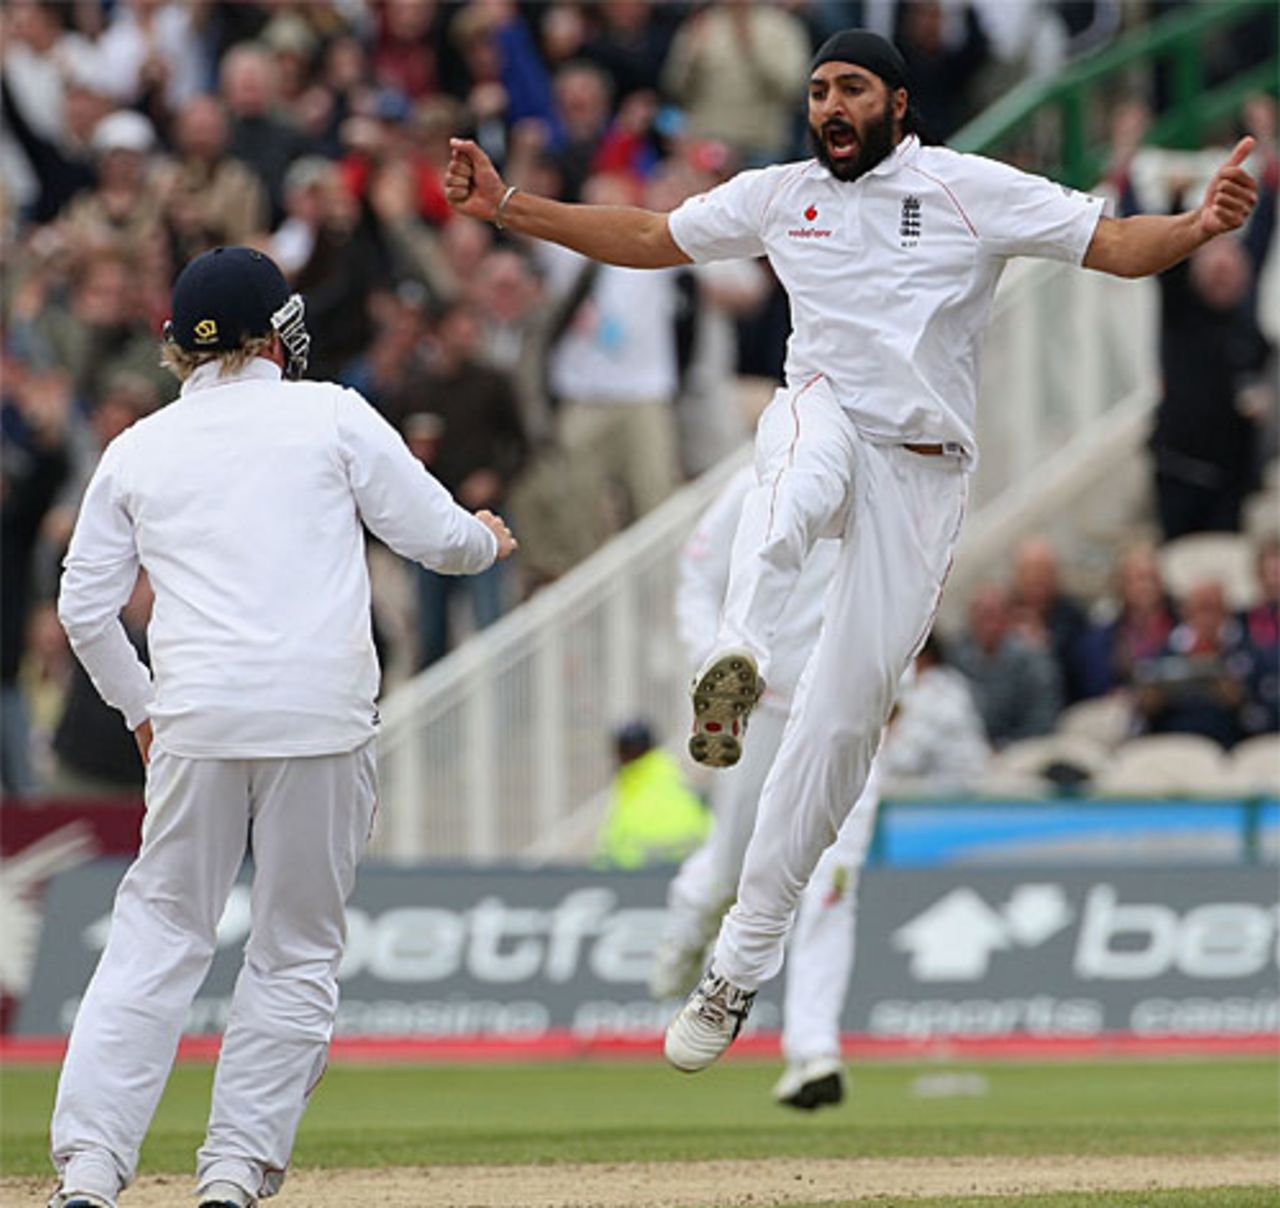 Monty Panesar celebrates one of the five wickets which took him to 100 Test wickets, England v New Zealand, 2nd Test, Old Trafford, May 25, 2008